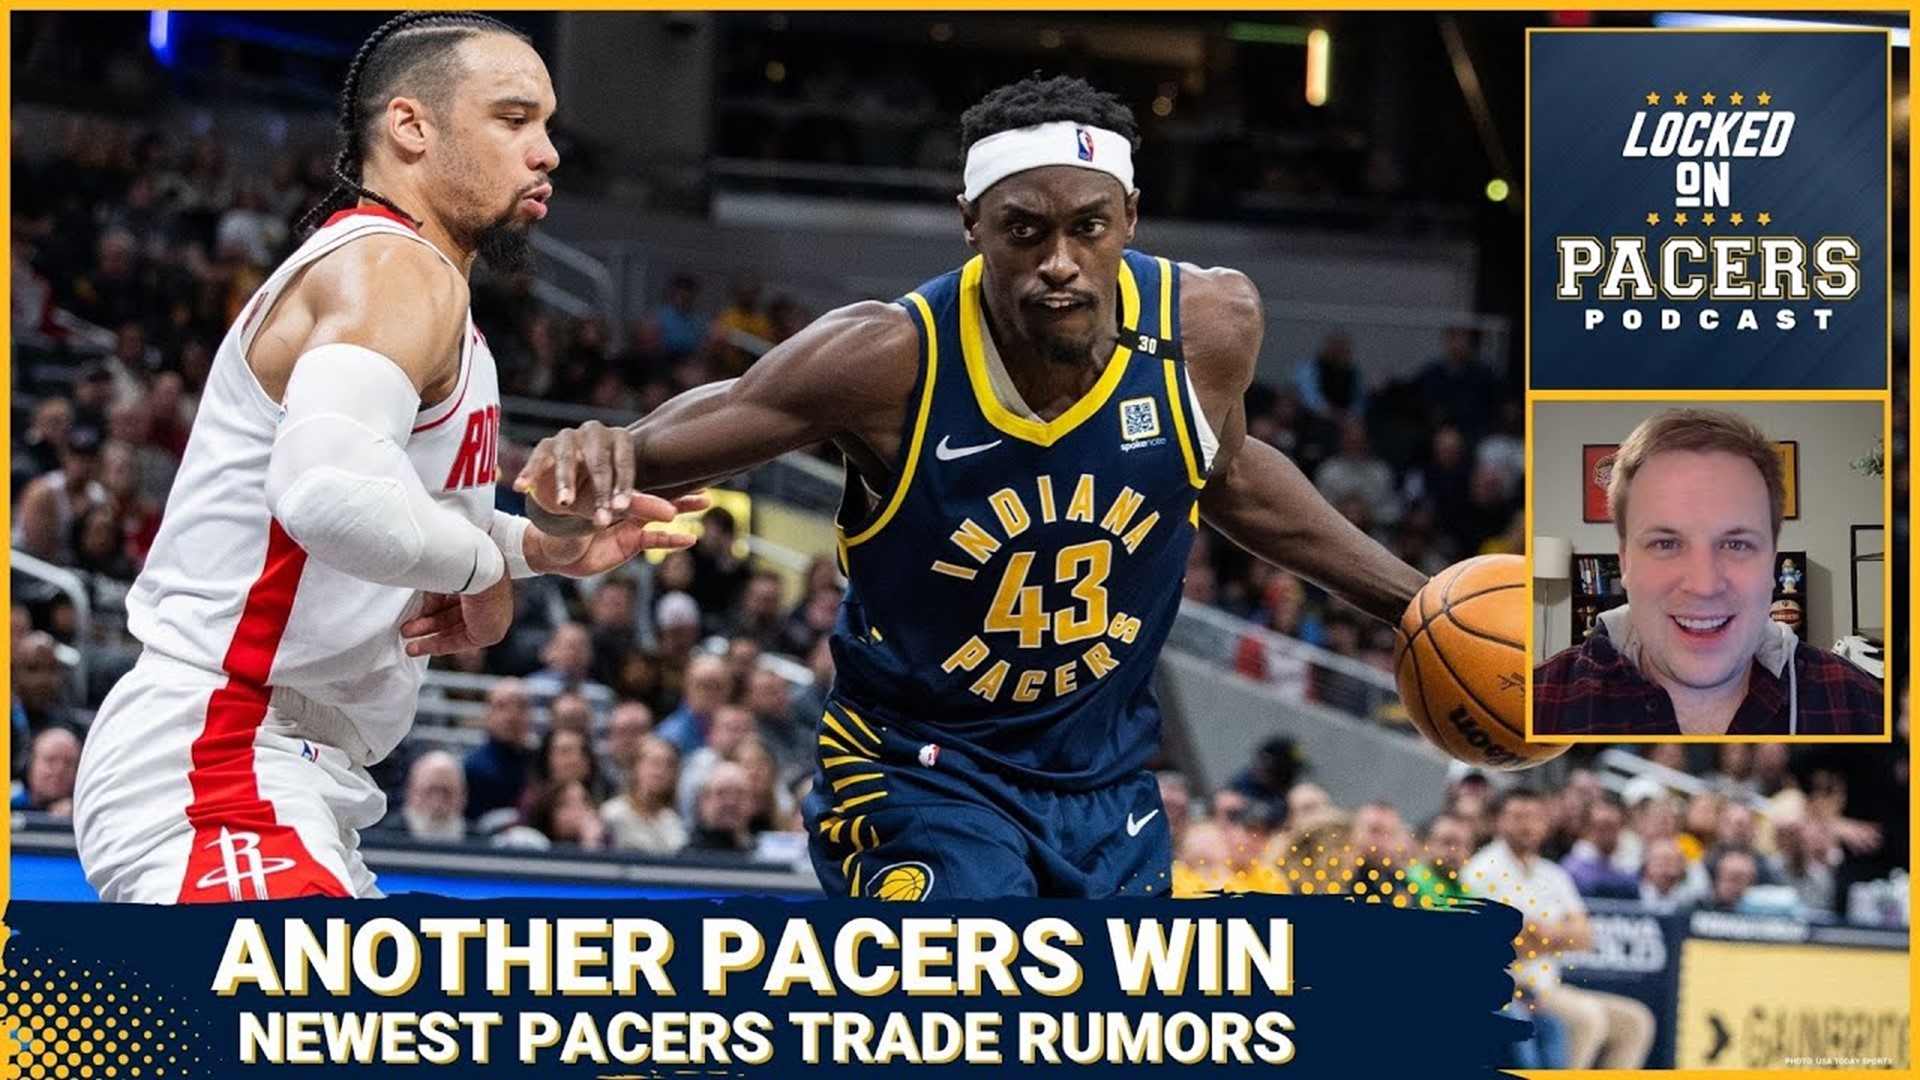 How the Indiana Pacers shined in the 2nd half to beat Houston Rockets + latest Pacers trade rumors